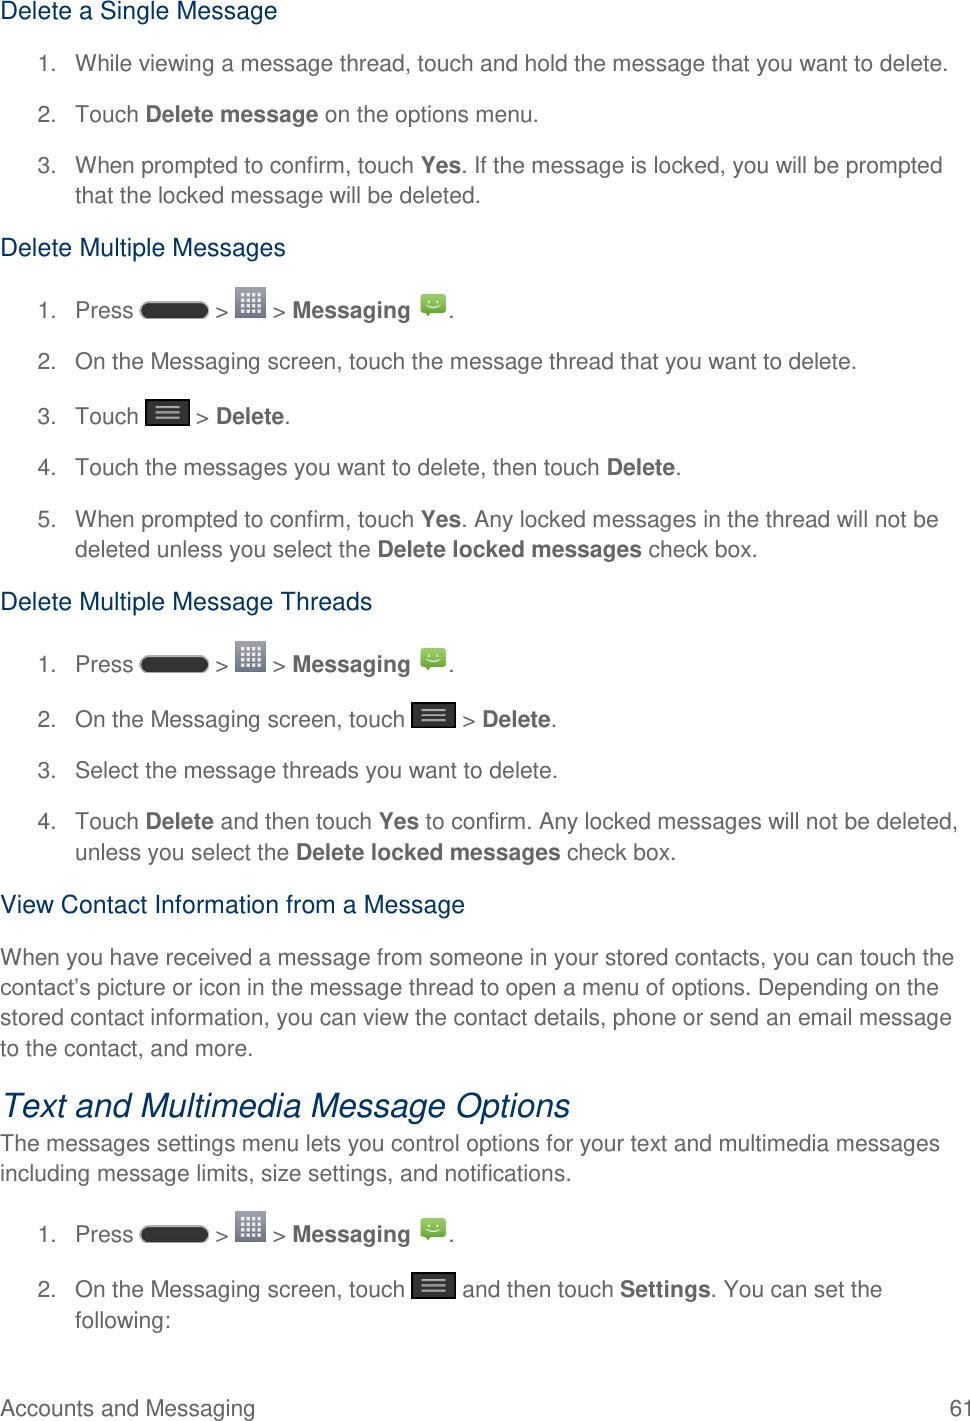 Accounts and Messaging  61 Delete a Single Message 1.  While viewing a message thread, touch and hold the message that you want to delete.  2.  Touch Delete message on the options menu.  3.  When prompted to confirm, touch Yes. If the message is locked, you will be prompted that the locked message will be deleted. Delete Multiple Messages 1.  Press   &gt;   &gt; Messaging  . 2.  On the Messaging screen, touch the message thread that you want to delete. 3.  Touch   &gt; Delete. 4.  Touch the messages you want to delete, then touch Delete. 5.  When prompted to confirm, touch Yes. Any locked messages in the thread will not be deleted unless you select the Delete locked messages check box. Delete Multiple Message Threads 1.  Press   &gt;   &gt; Messaging  . 2.  On the Messaging screen, touch   &gt; Delete.  3.  Select the message threads you want to delete.  4.  Touch Delete and then touch Yes to confirm. Any locked messages will not be deleted, unless you select the Delete locked messages check box. View Contact Information from a Message When you have received a message from someone in your stored contacts, you can touch the contact‘s picture or icon in the message thread to open a menu of options. Depending on the stored contact information, you can view the contact details, phone or send an email message to the contact, and more. Text and Multimedia Message Options The messages settings menu lets you control options for your text and multimedia messages including message limits, size settings, and notifications. 1.  Press   &gt;   &gt; Messaging  . 2.  On the Messaging screen, touch   and then touch Settings. You can set the following: 